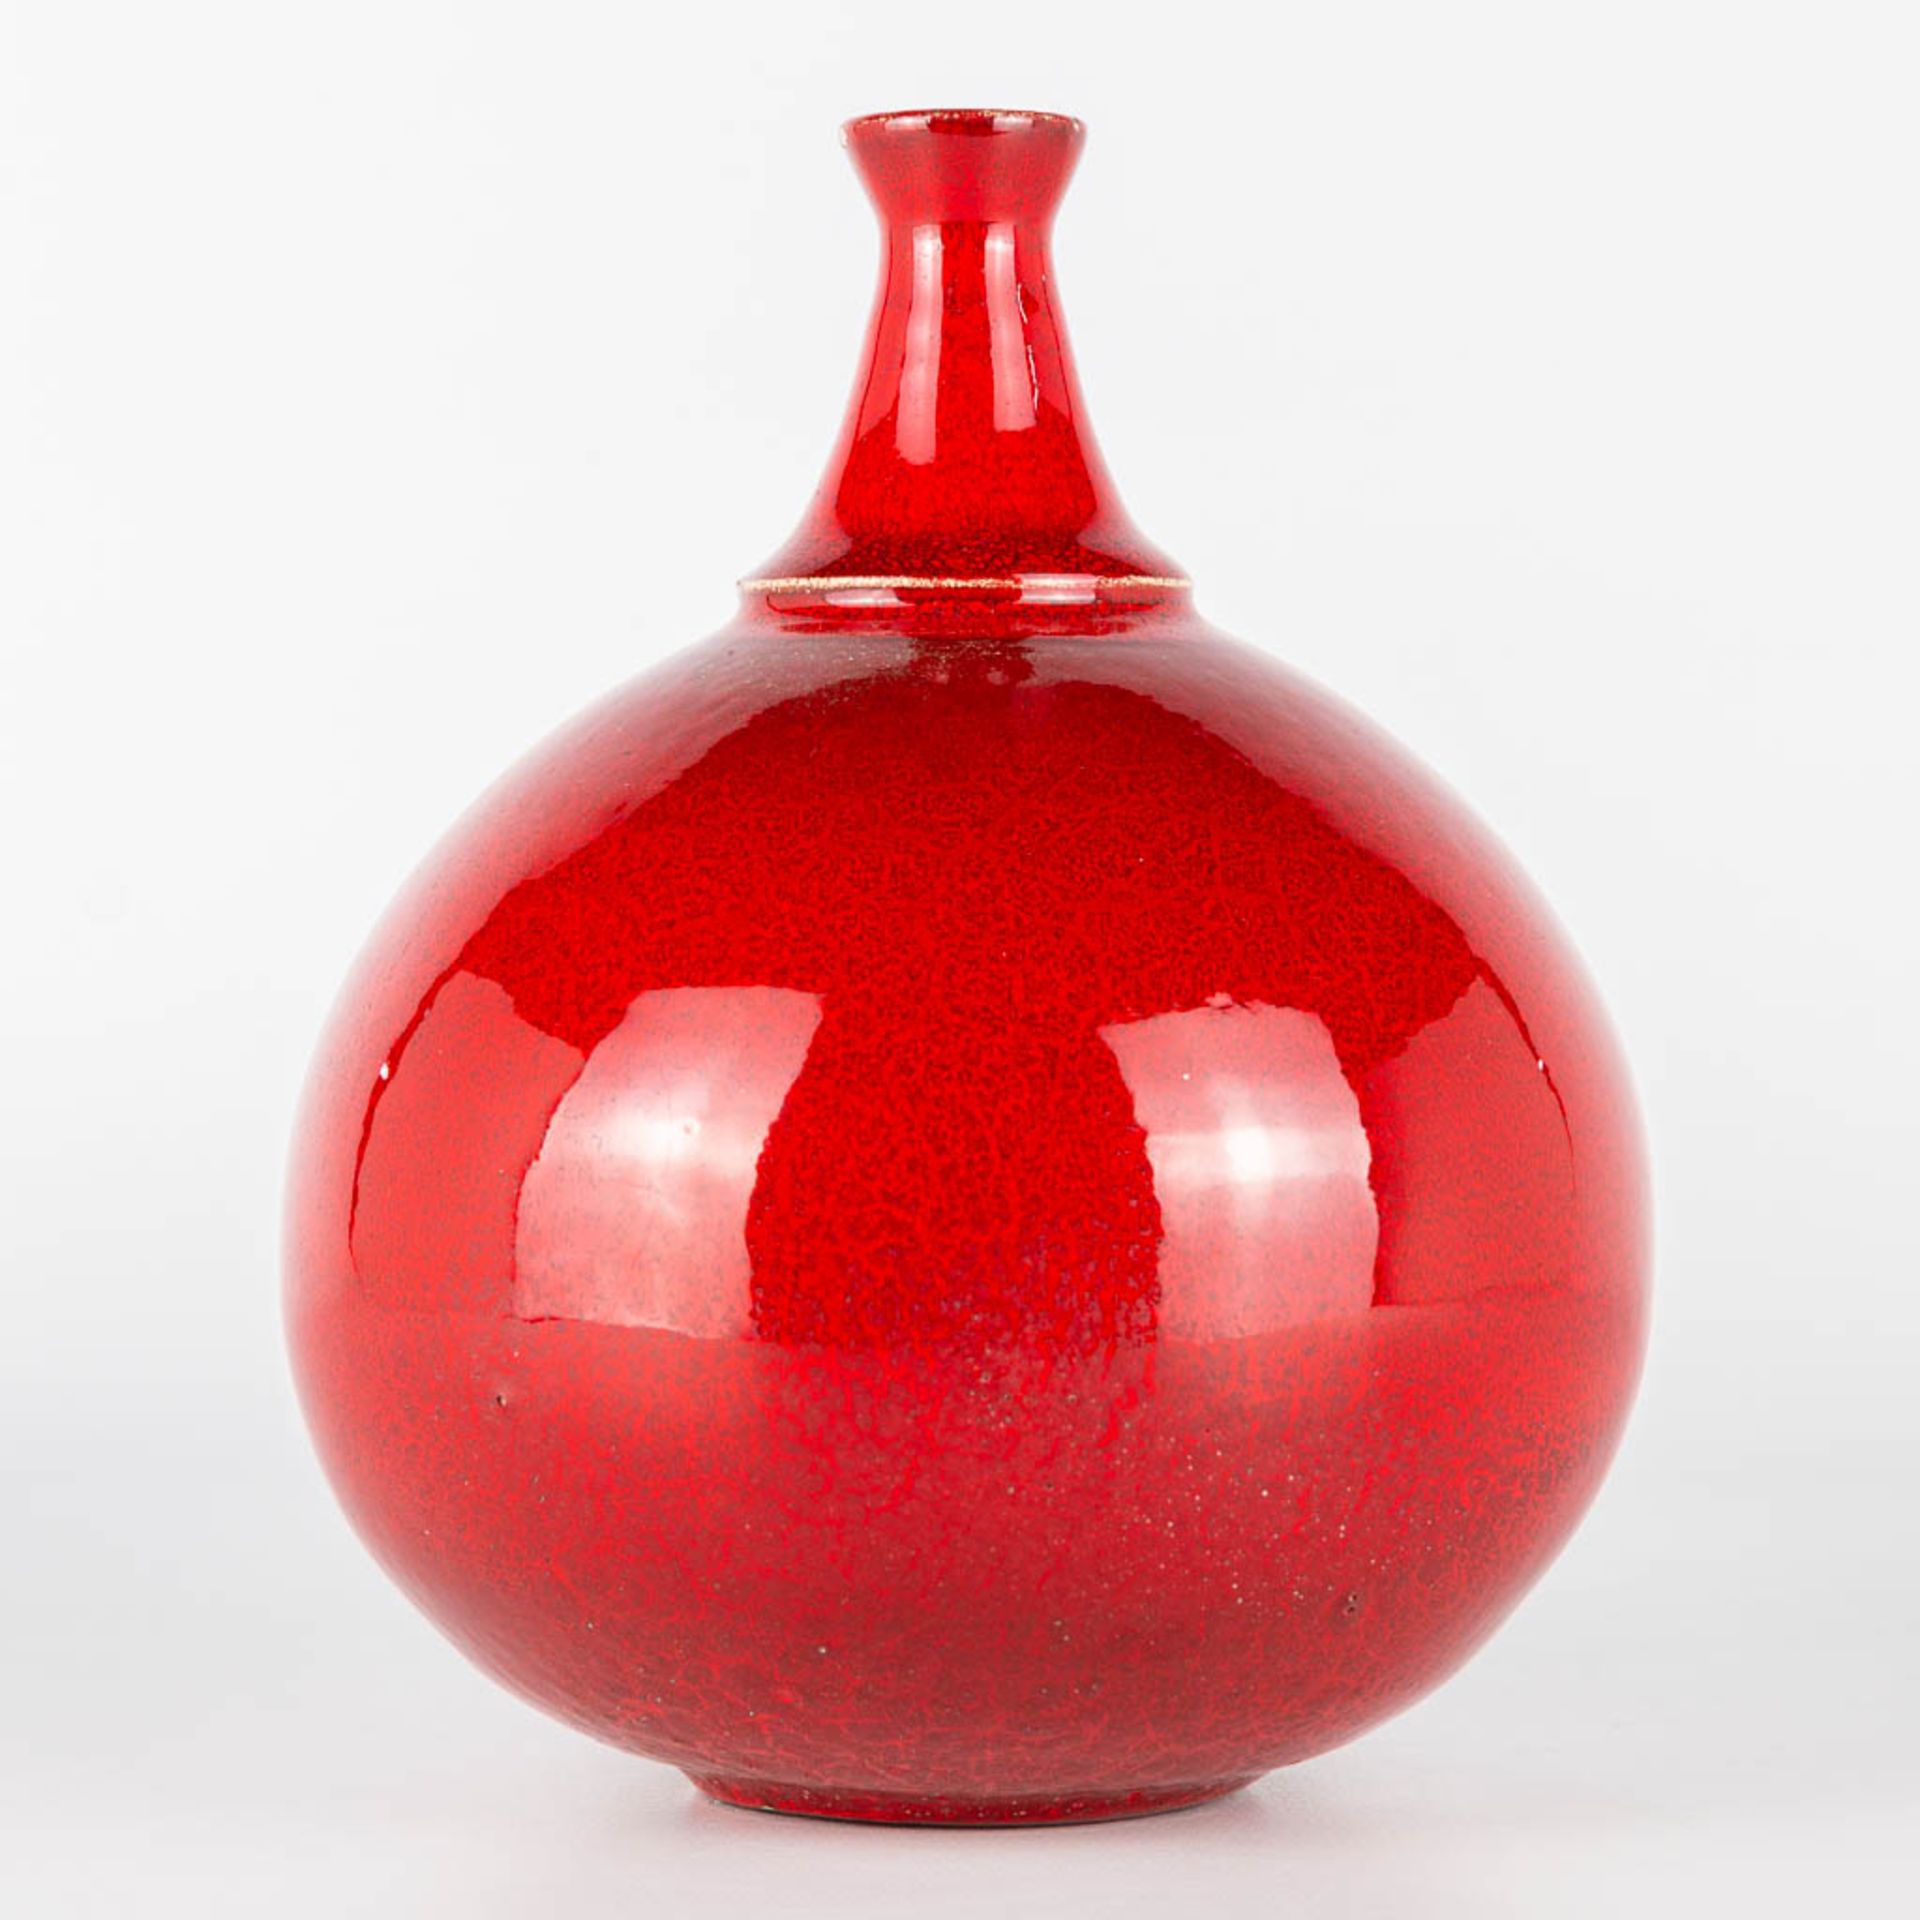 A vase made of red glazed white ceramics and probably made in Scandinavia. Period 1960-1970. (17 x 1